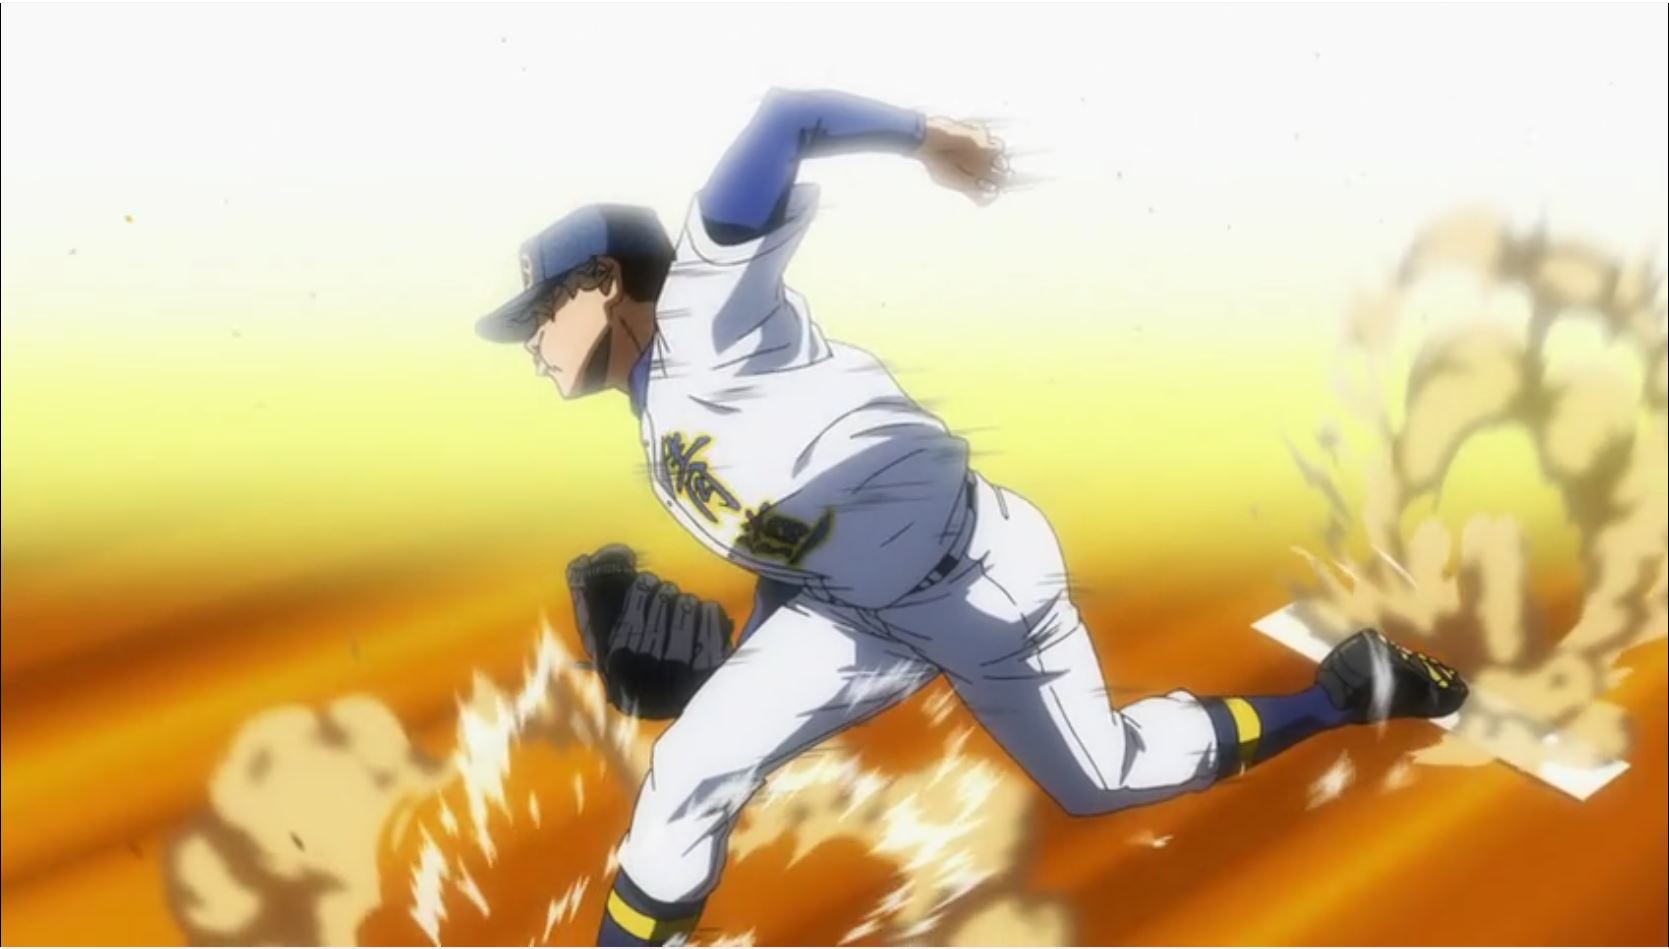 Ace of Diamond Season 4: Current Status, Release Date & Everything We Know  » Amazfeed